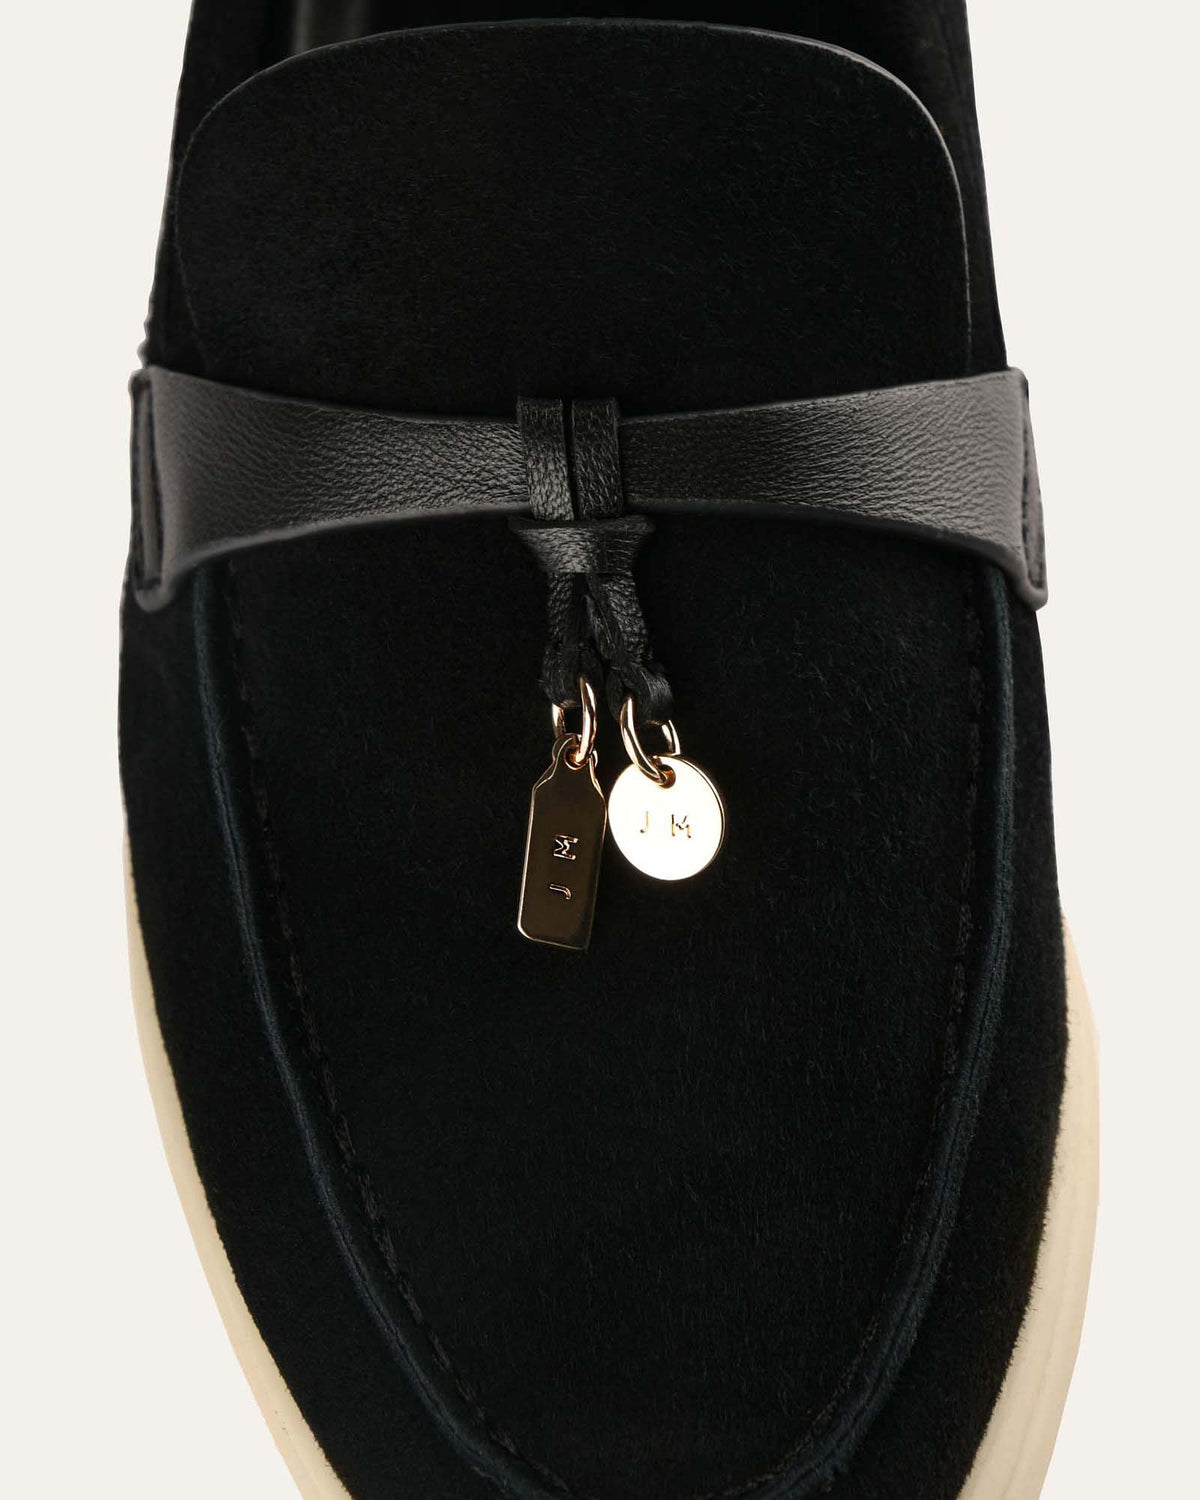 CIRCA LOAFERS SOFT BLACK SUEDE